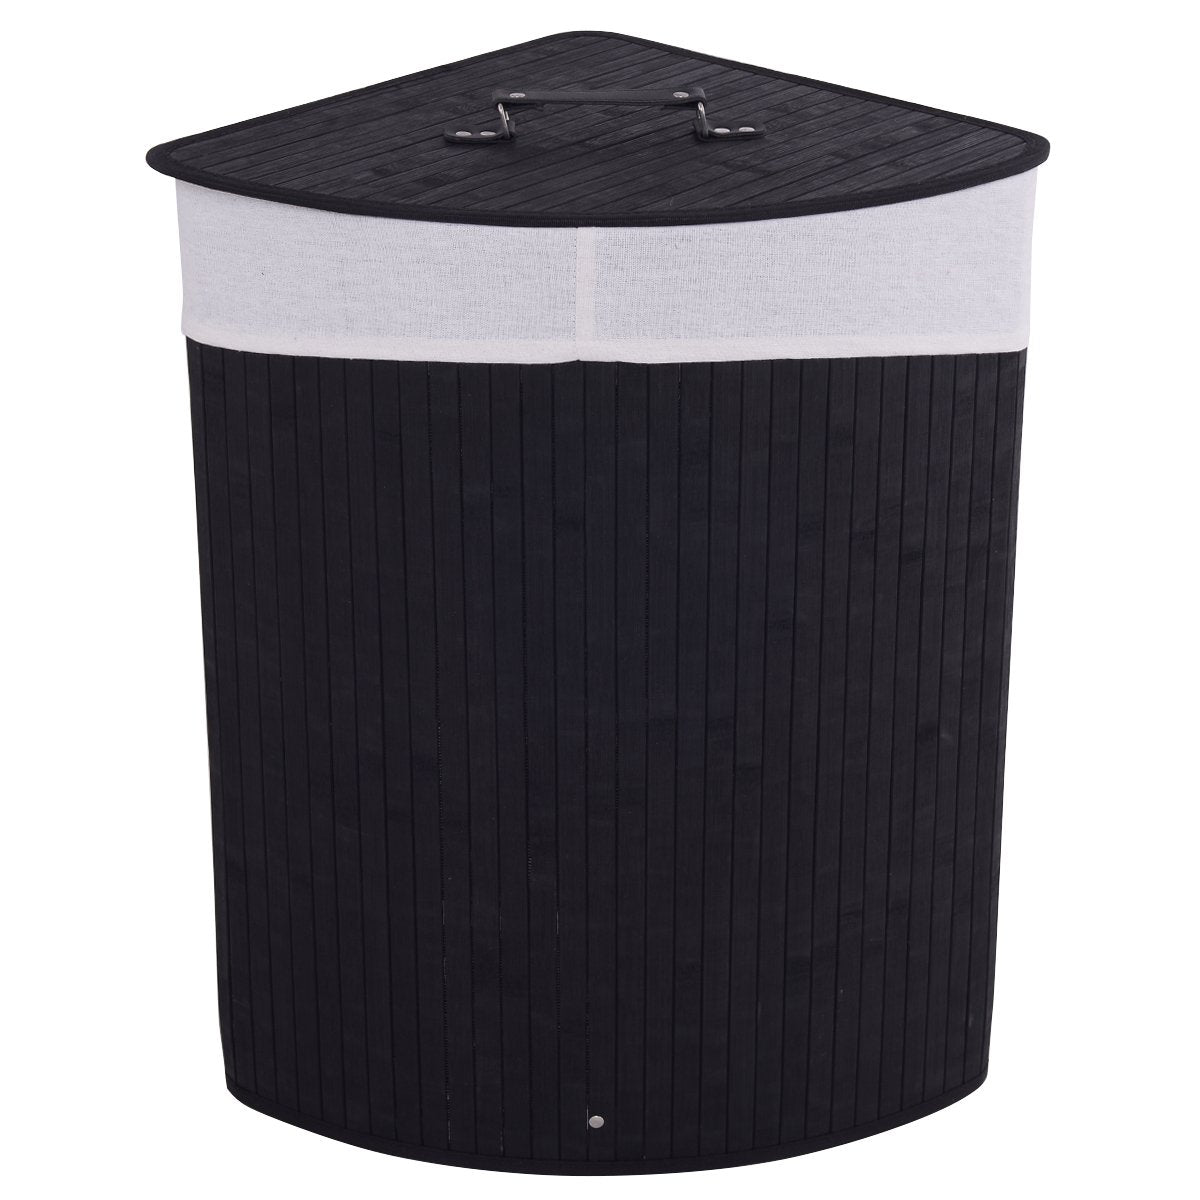 Giantex Corner Laundry Hamper with Lid, Bamboo Laundry Basket with Removable Liner and Handle